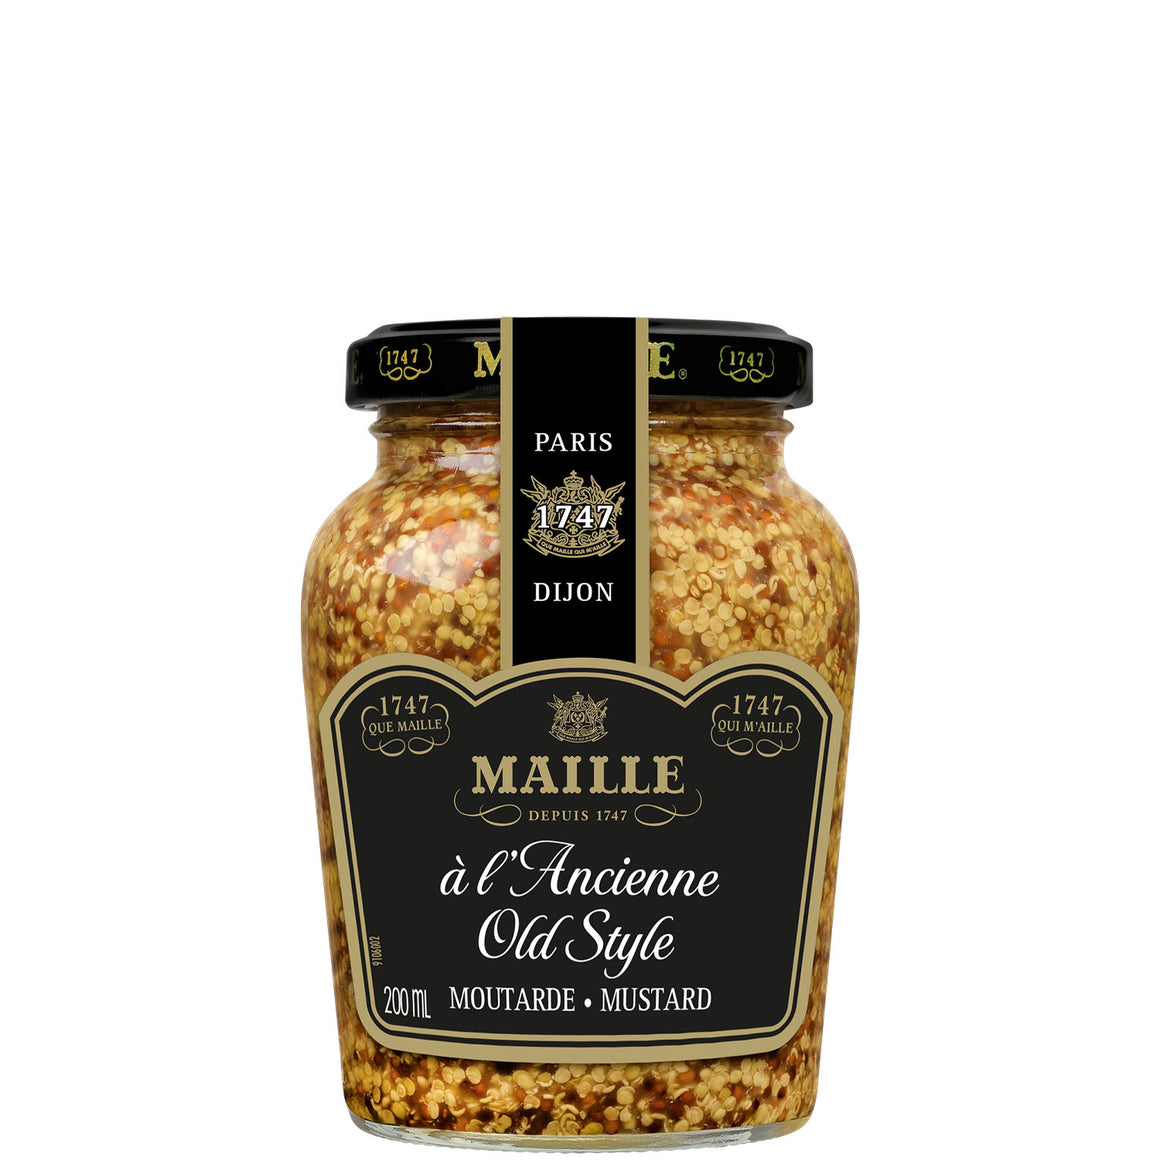 Maille Mustard The Old Style 200ml